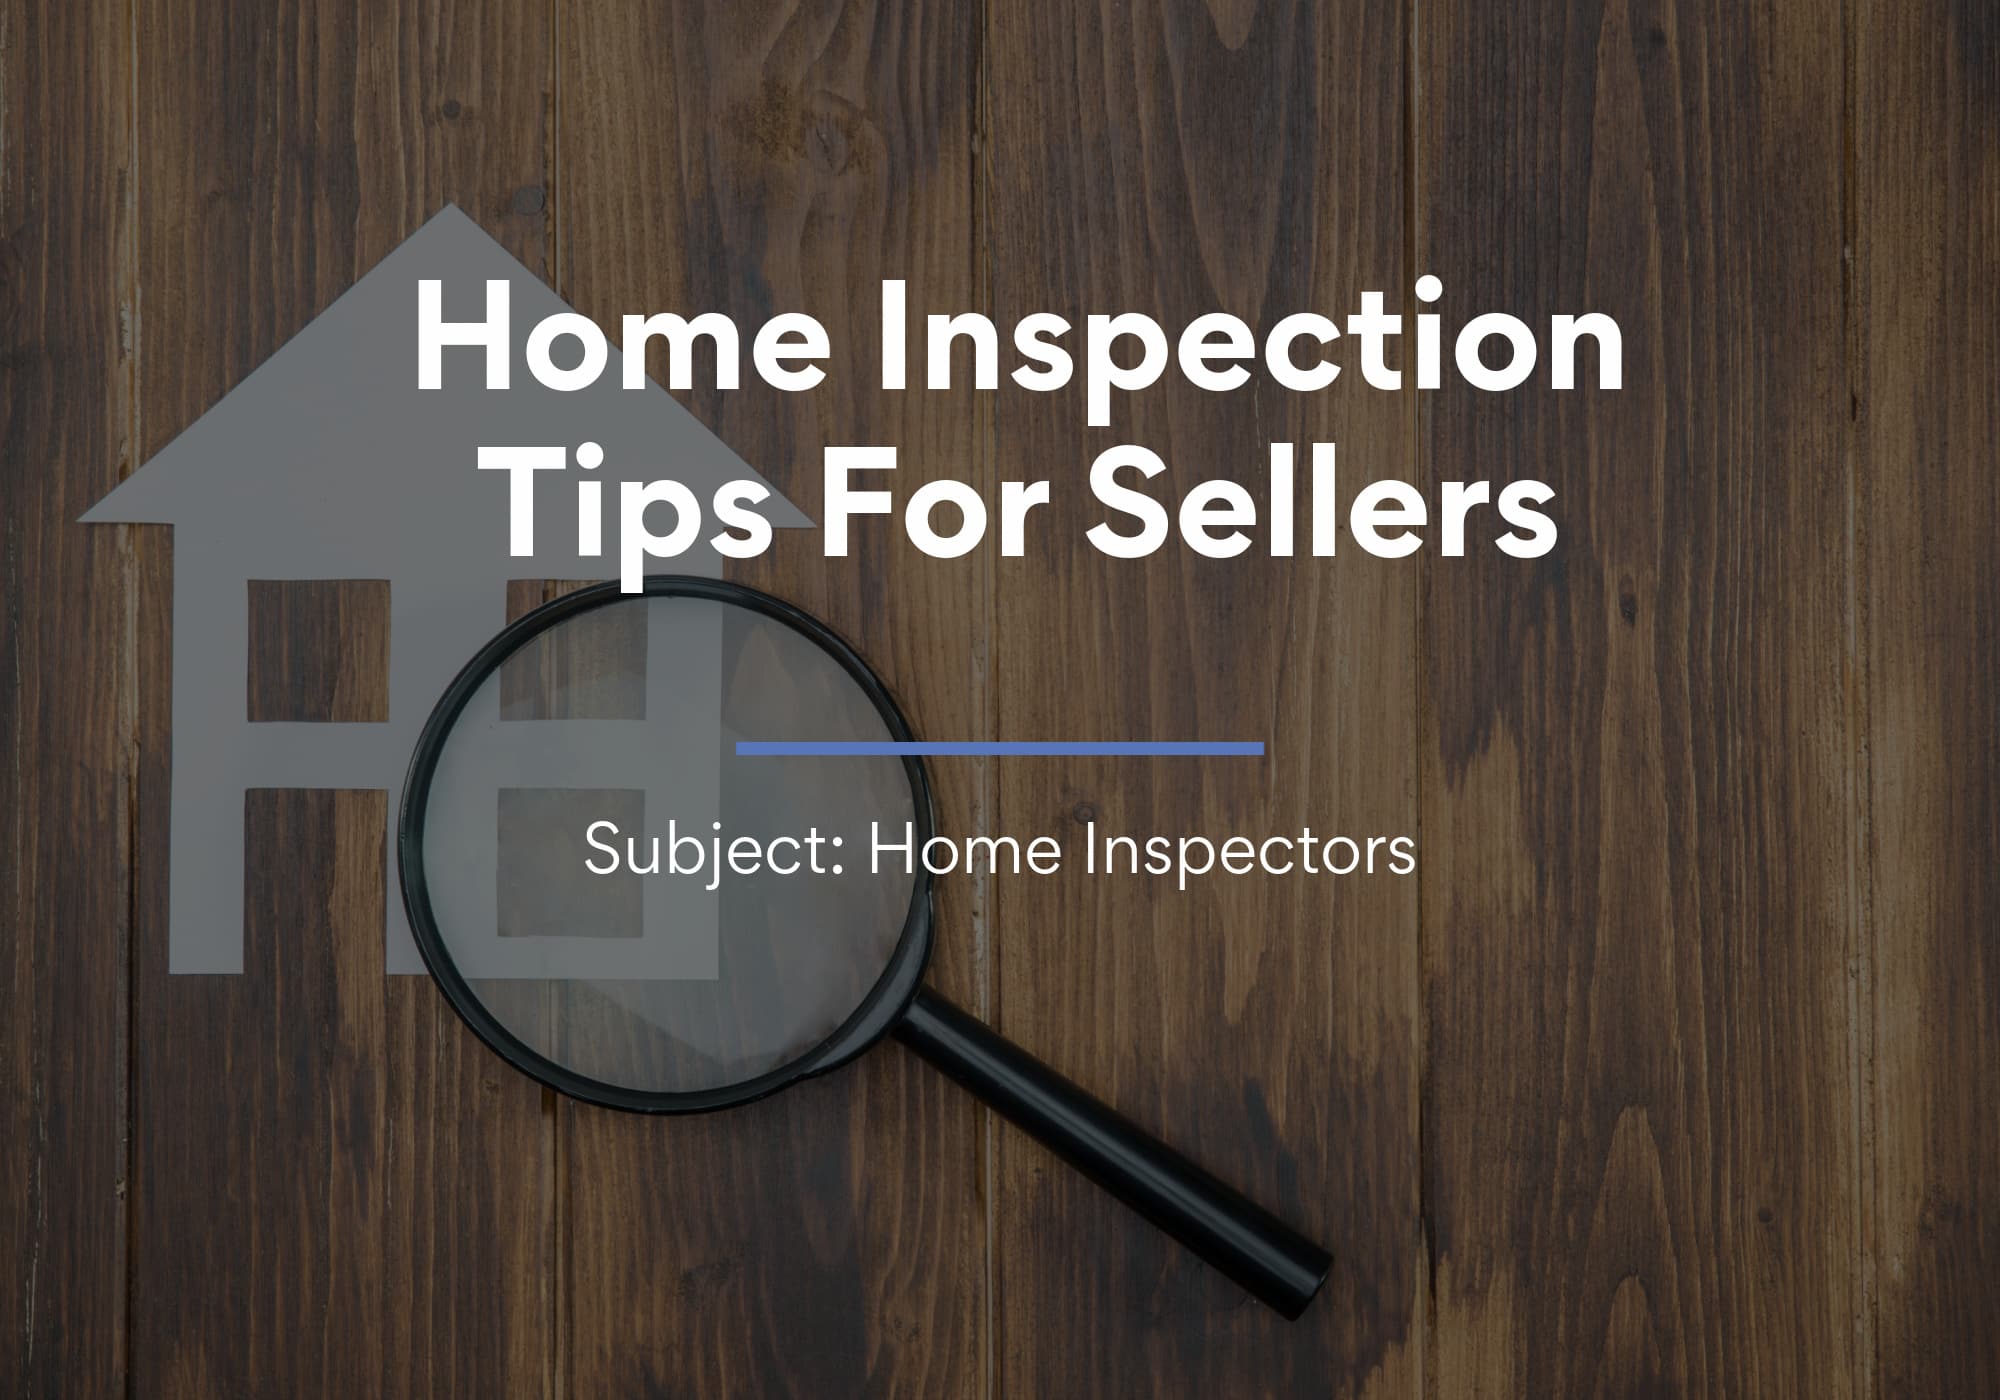 Home Inspection Tips For Sellers